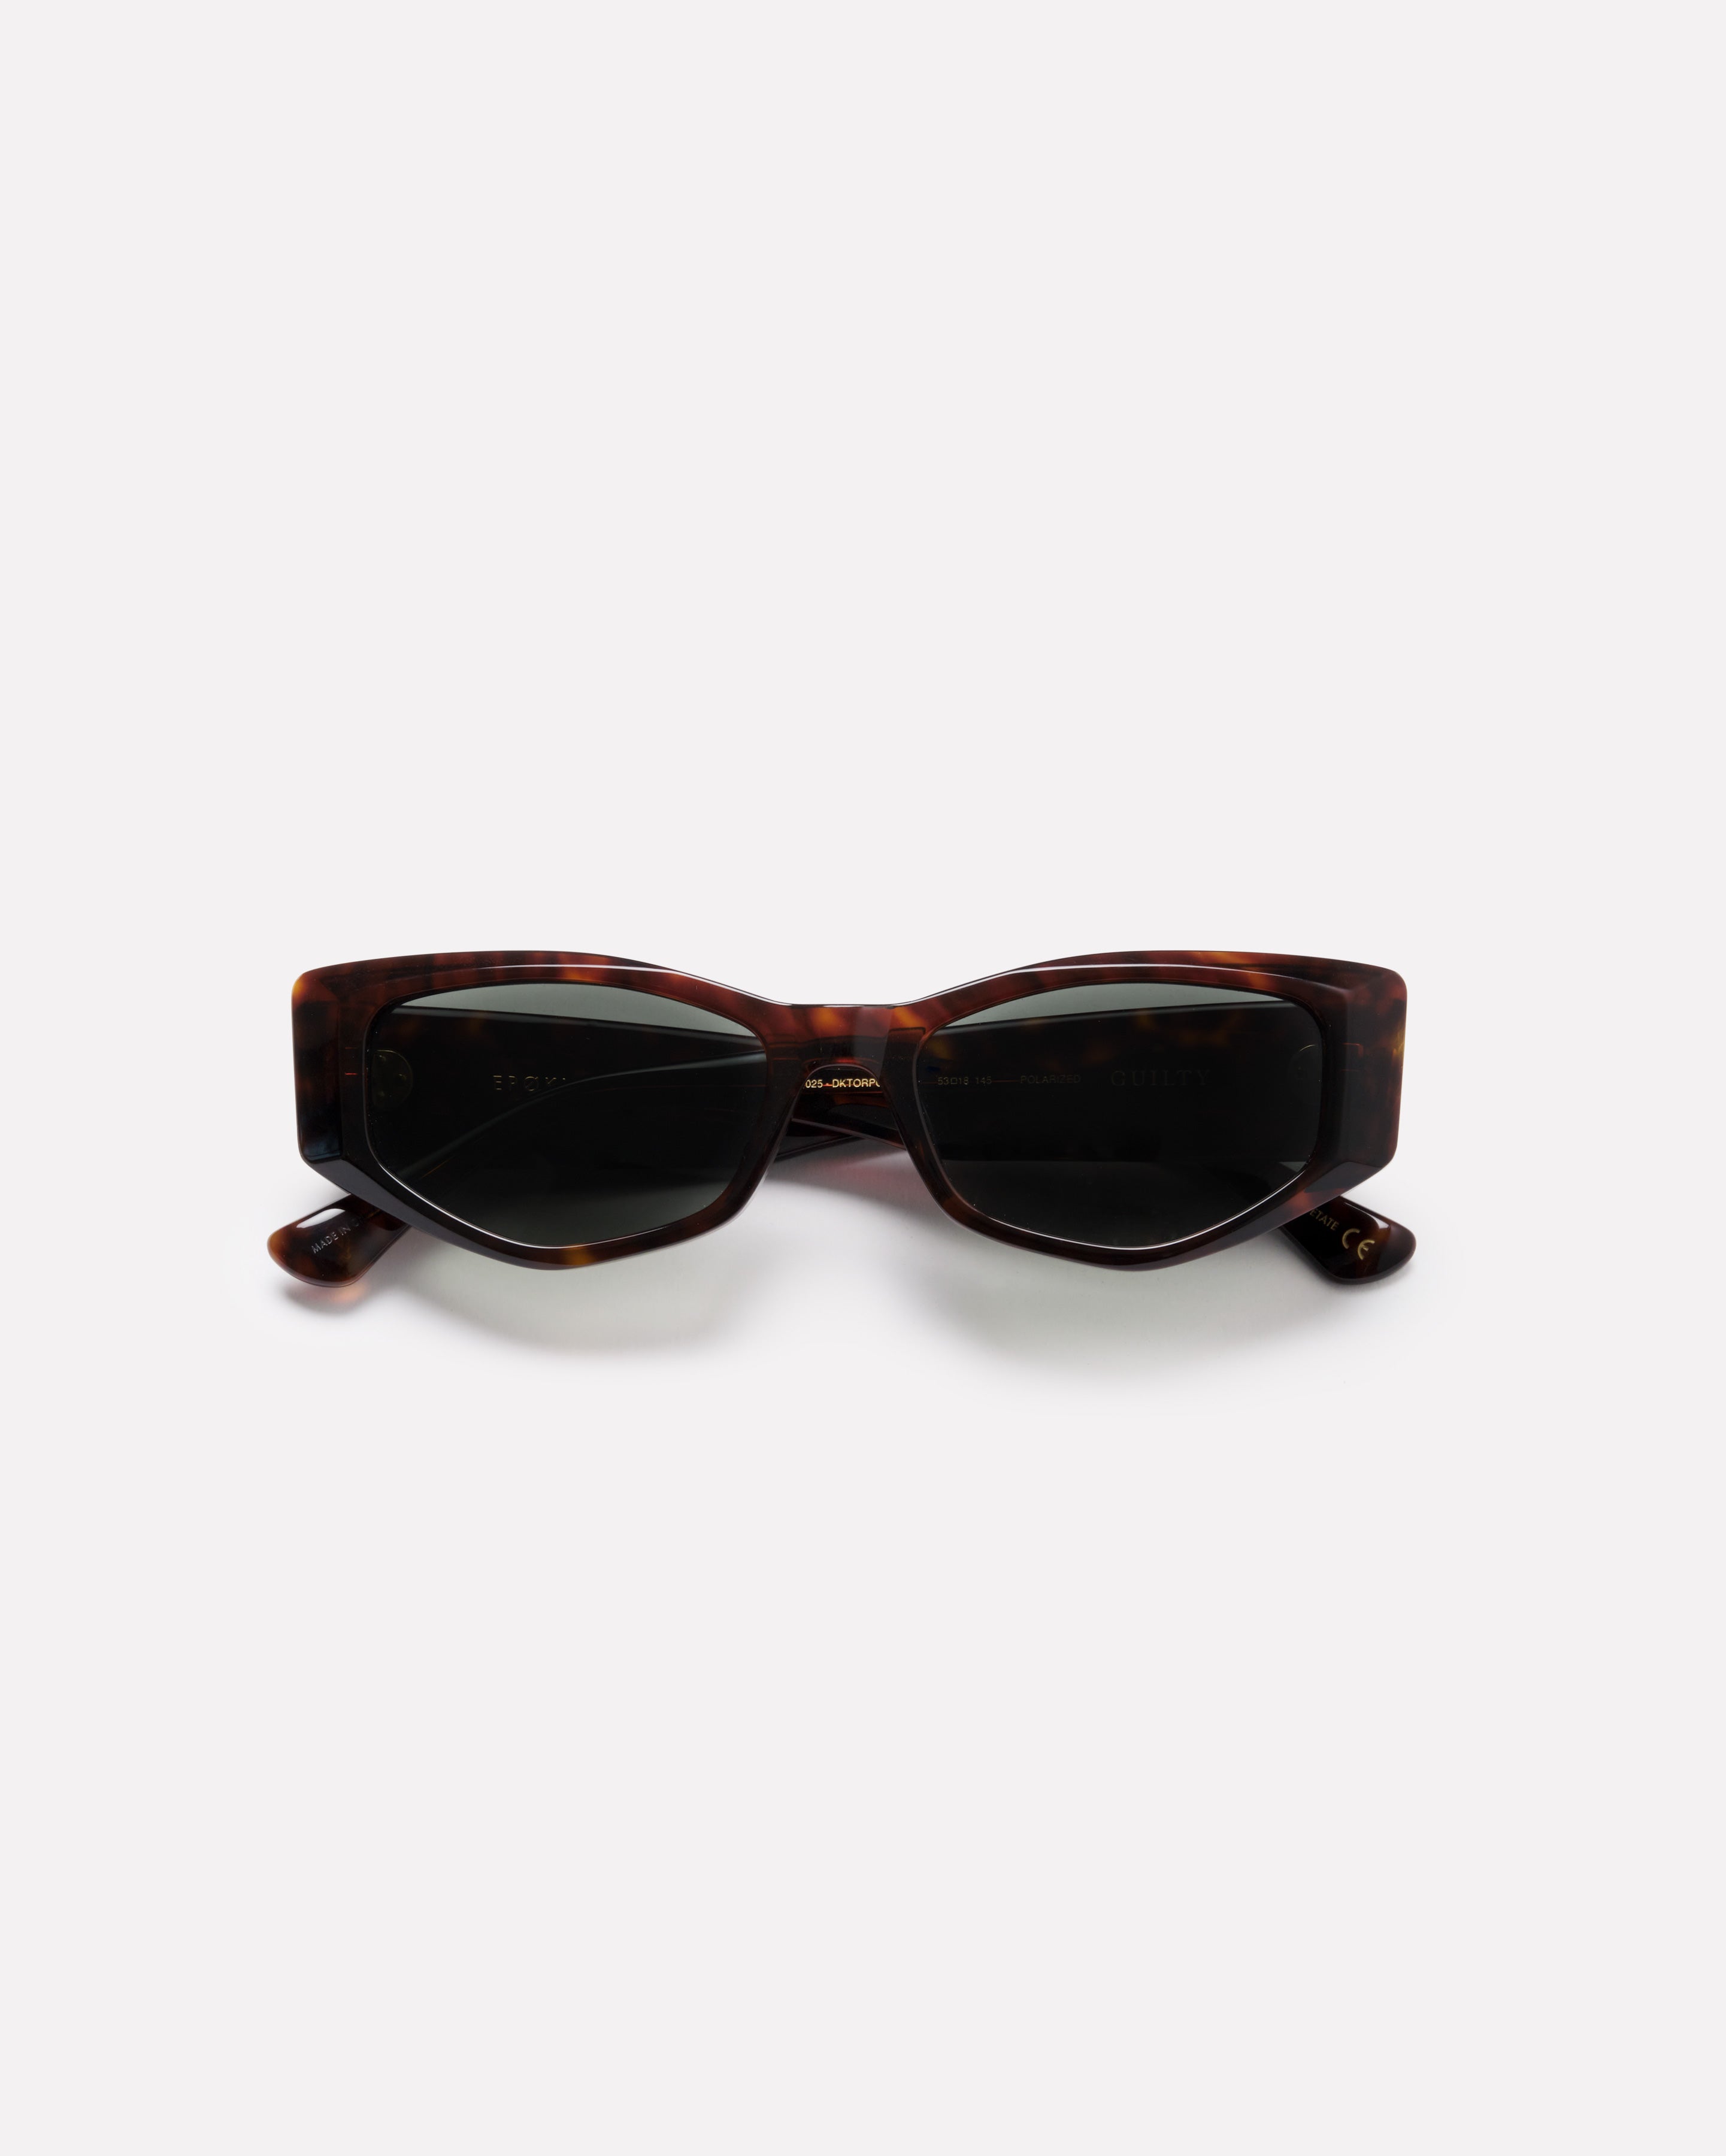 GUILTY x Wasted Talent - Tortoise Polished / Green Polarized